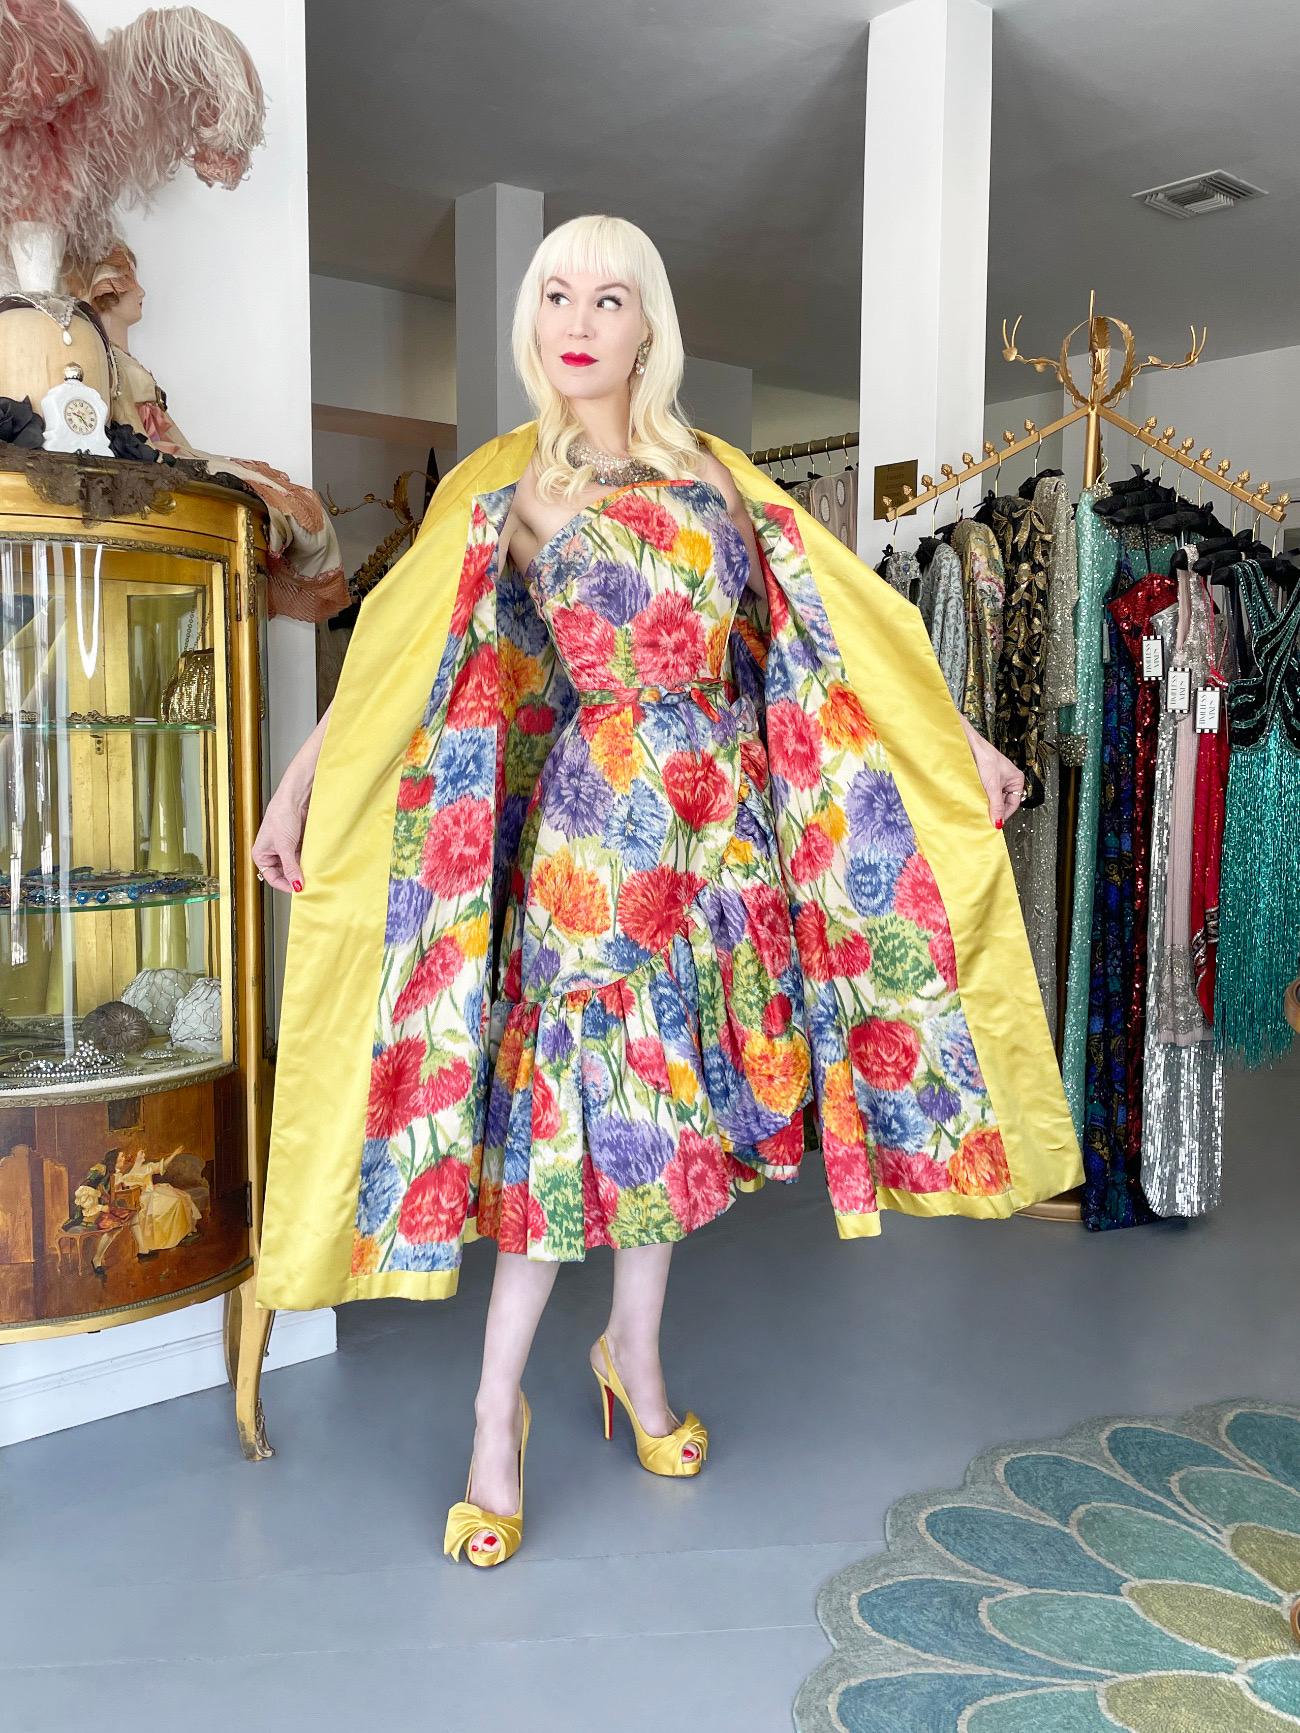 An absolutely gorgeous and ultra rare Arnold Scaasi custom couture colorful watercolor floral print silk dress and matching golden yellow satin jacket dating back to his 1958 spring/summer collection. Scaasi started his career designing for Charles